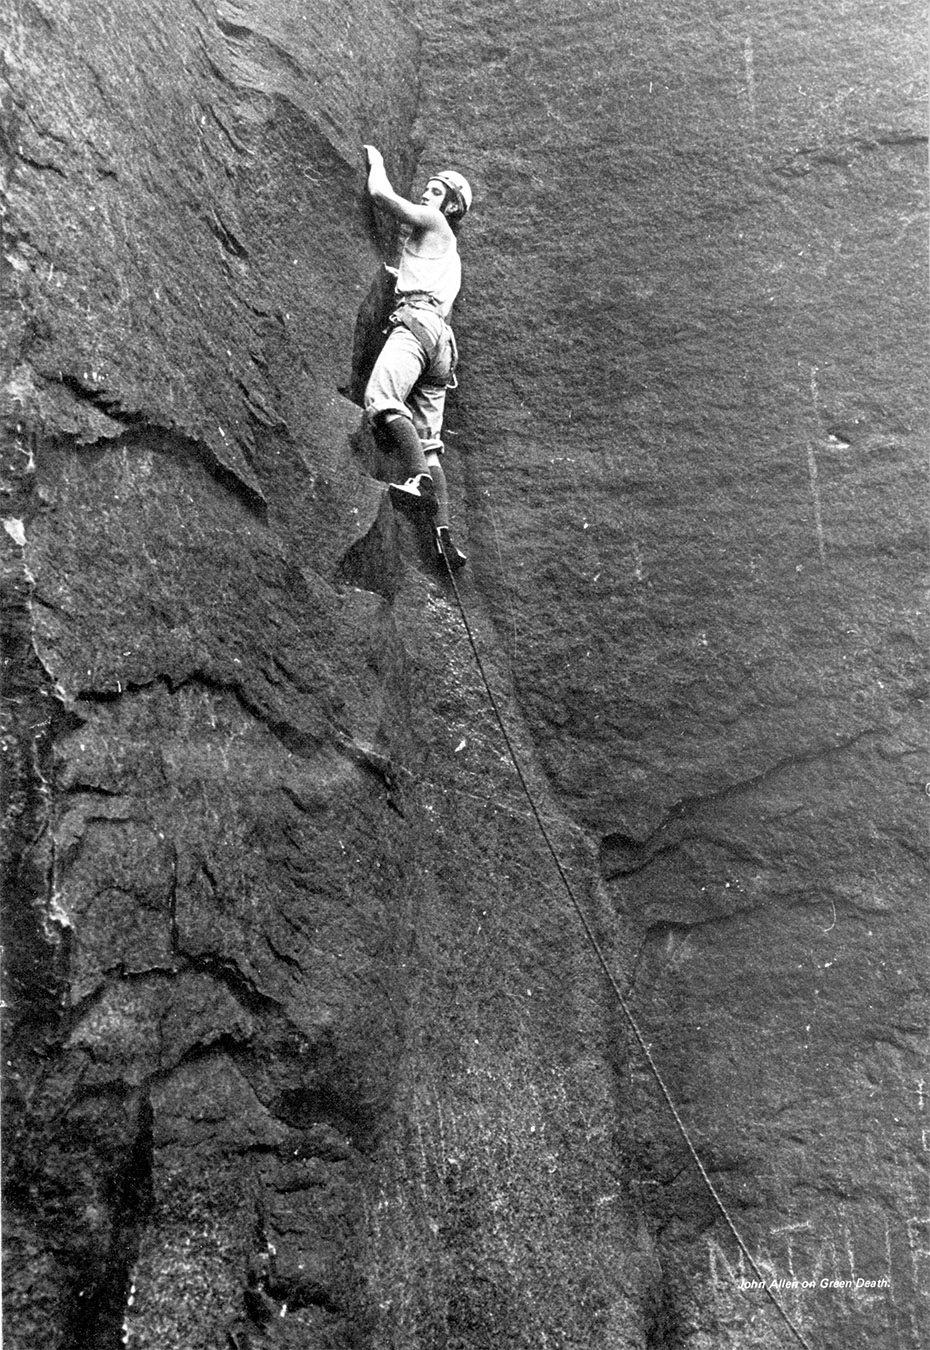 John Allen on Green Death at Millstone Edge, a route now graded E5 6b. Photo: © Geoff Birtles